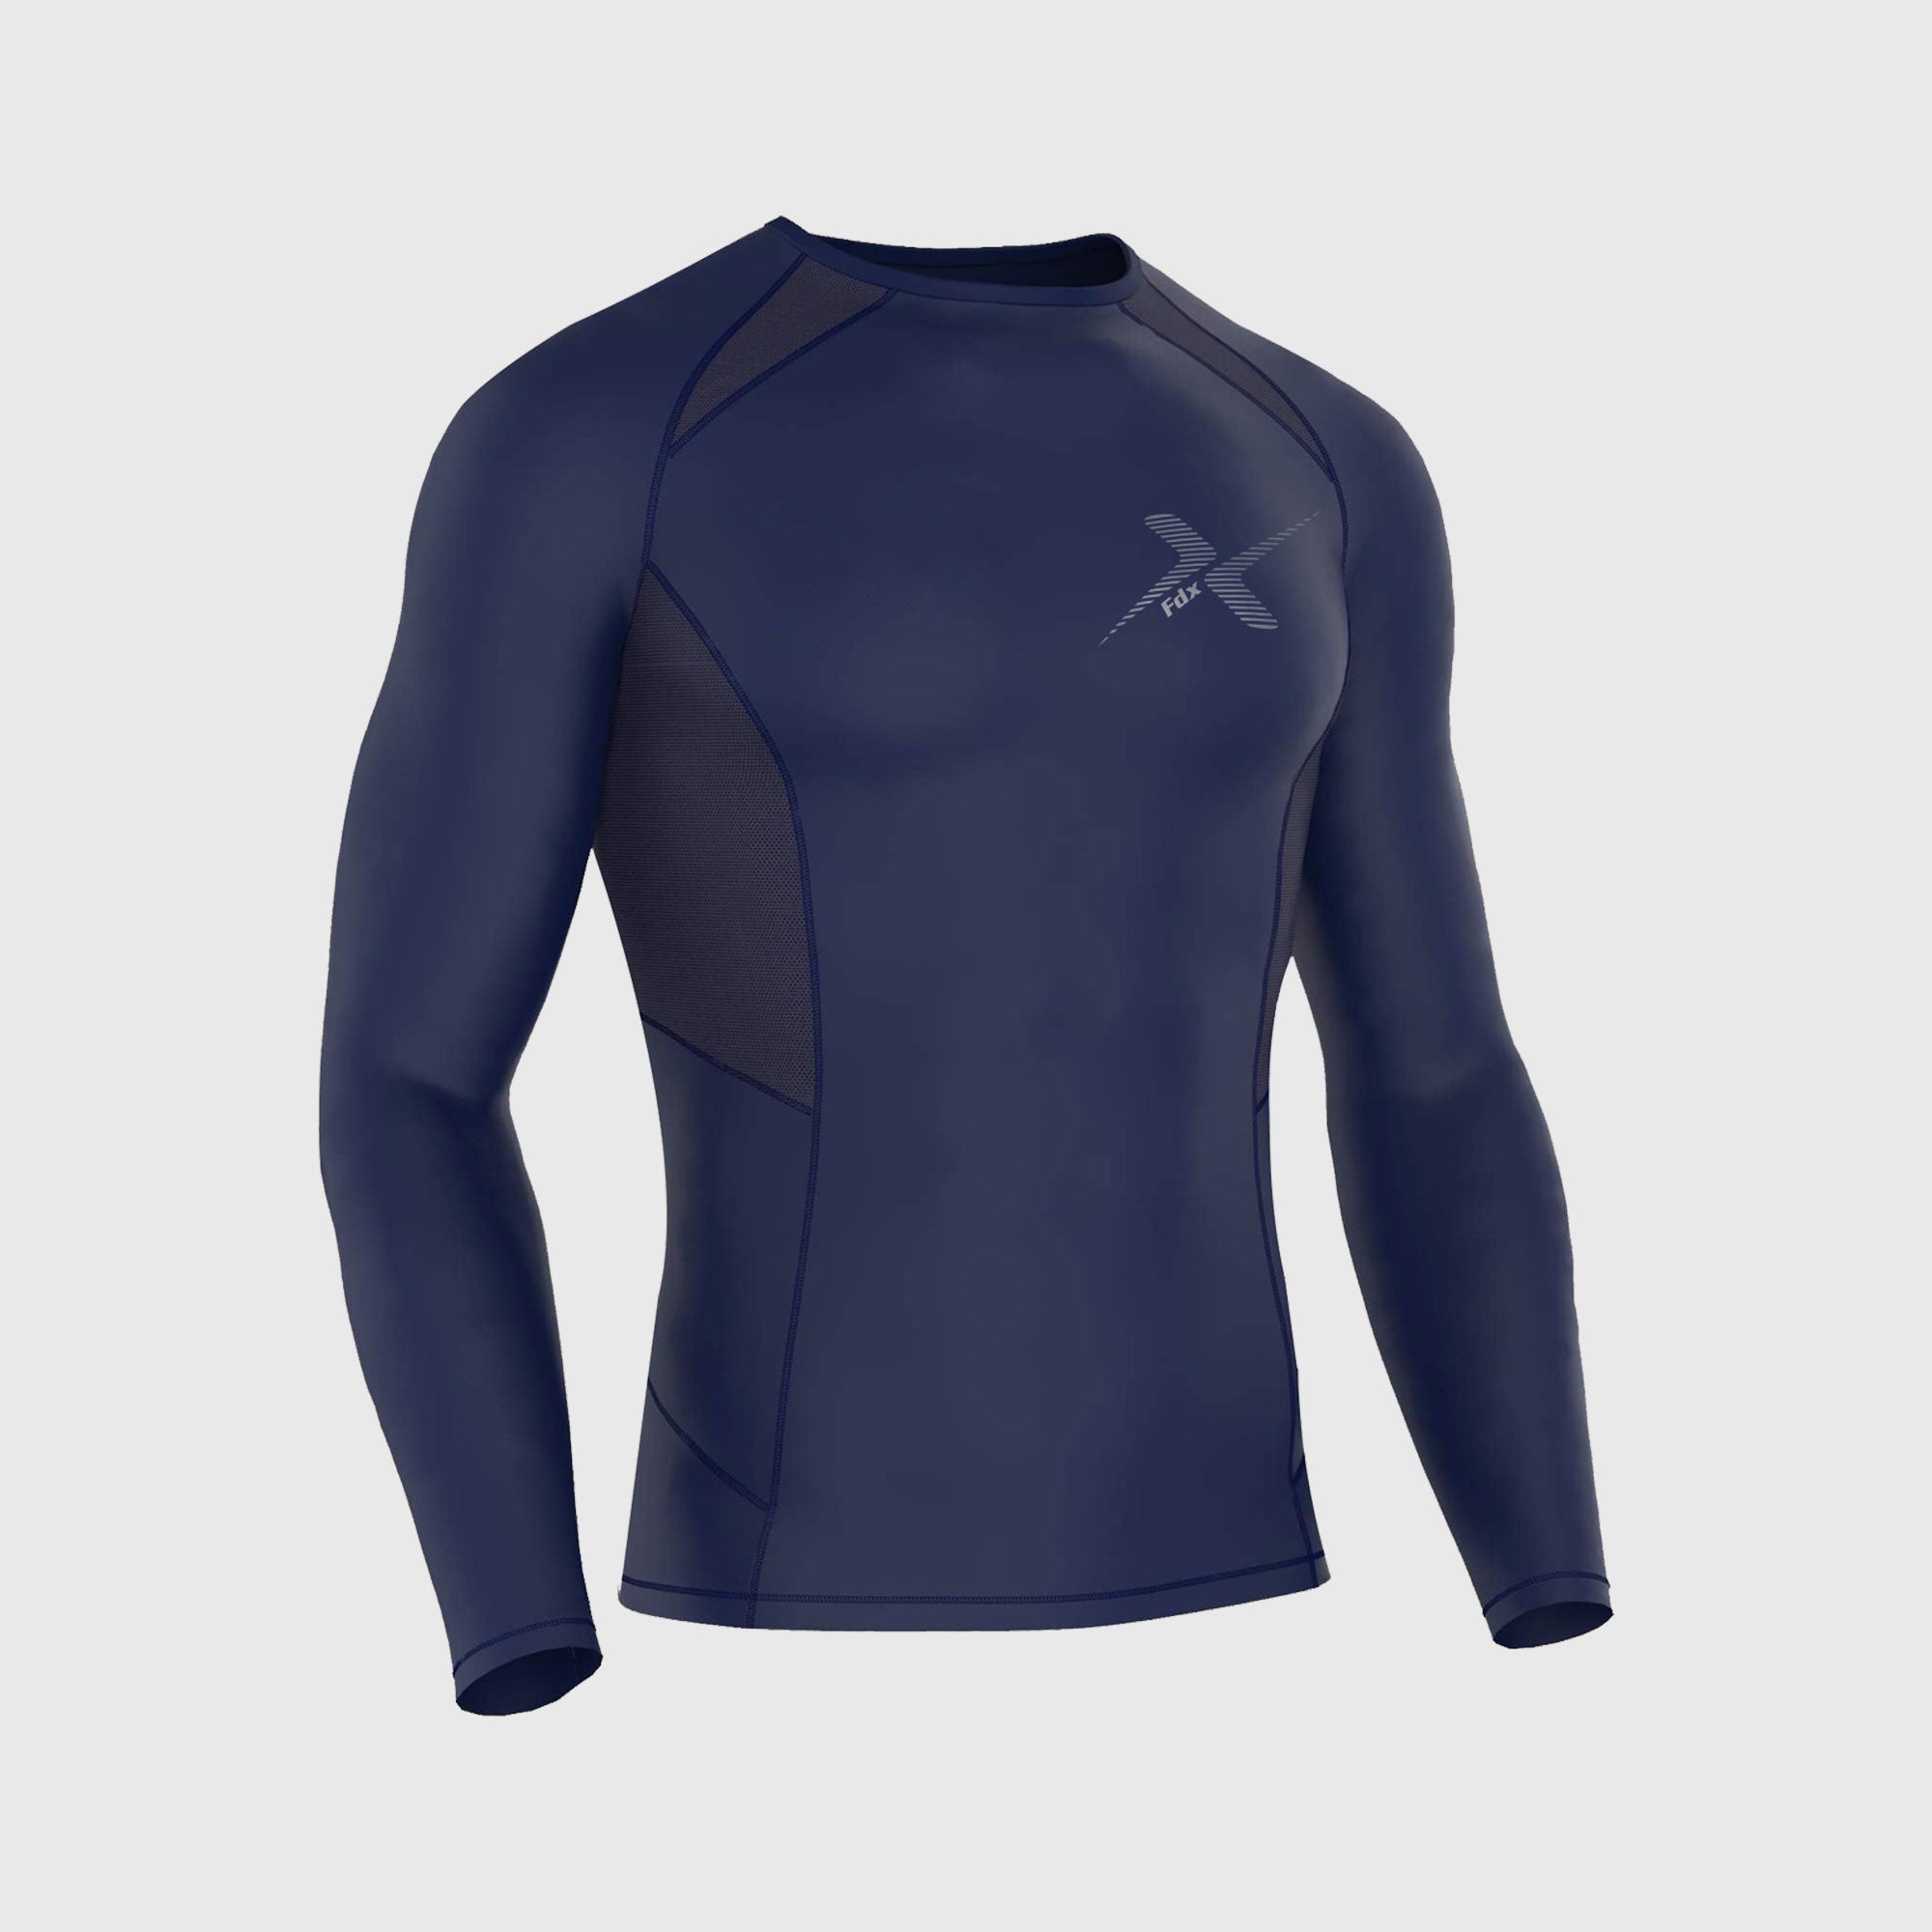 Fdx Recoil Navy Blue Men's Base Layer Thermal Winter Compression Top